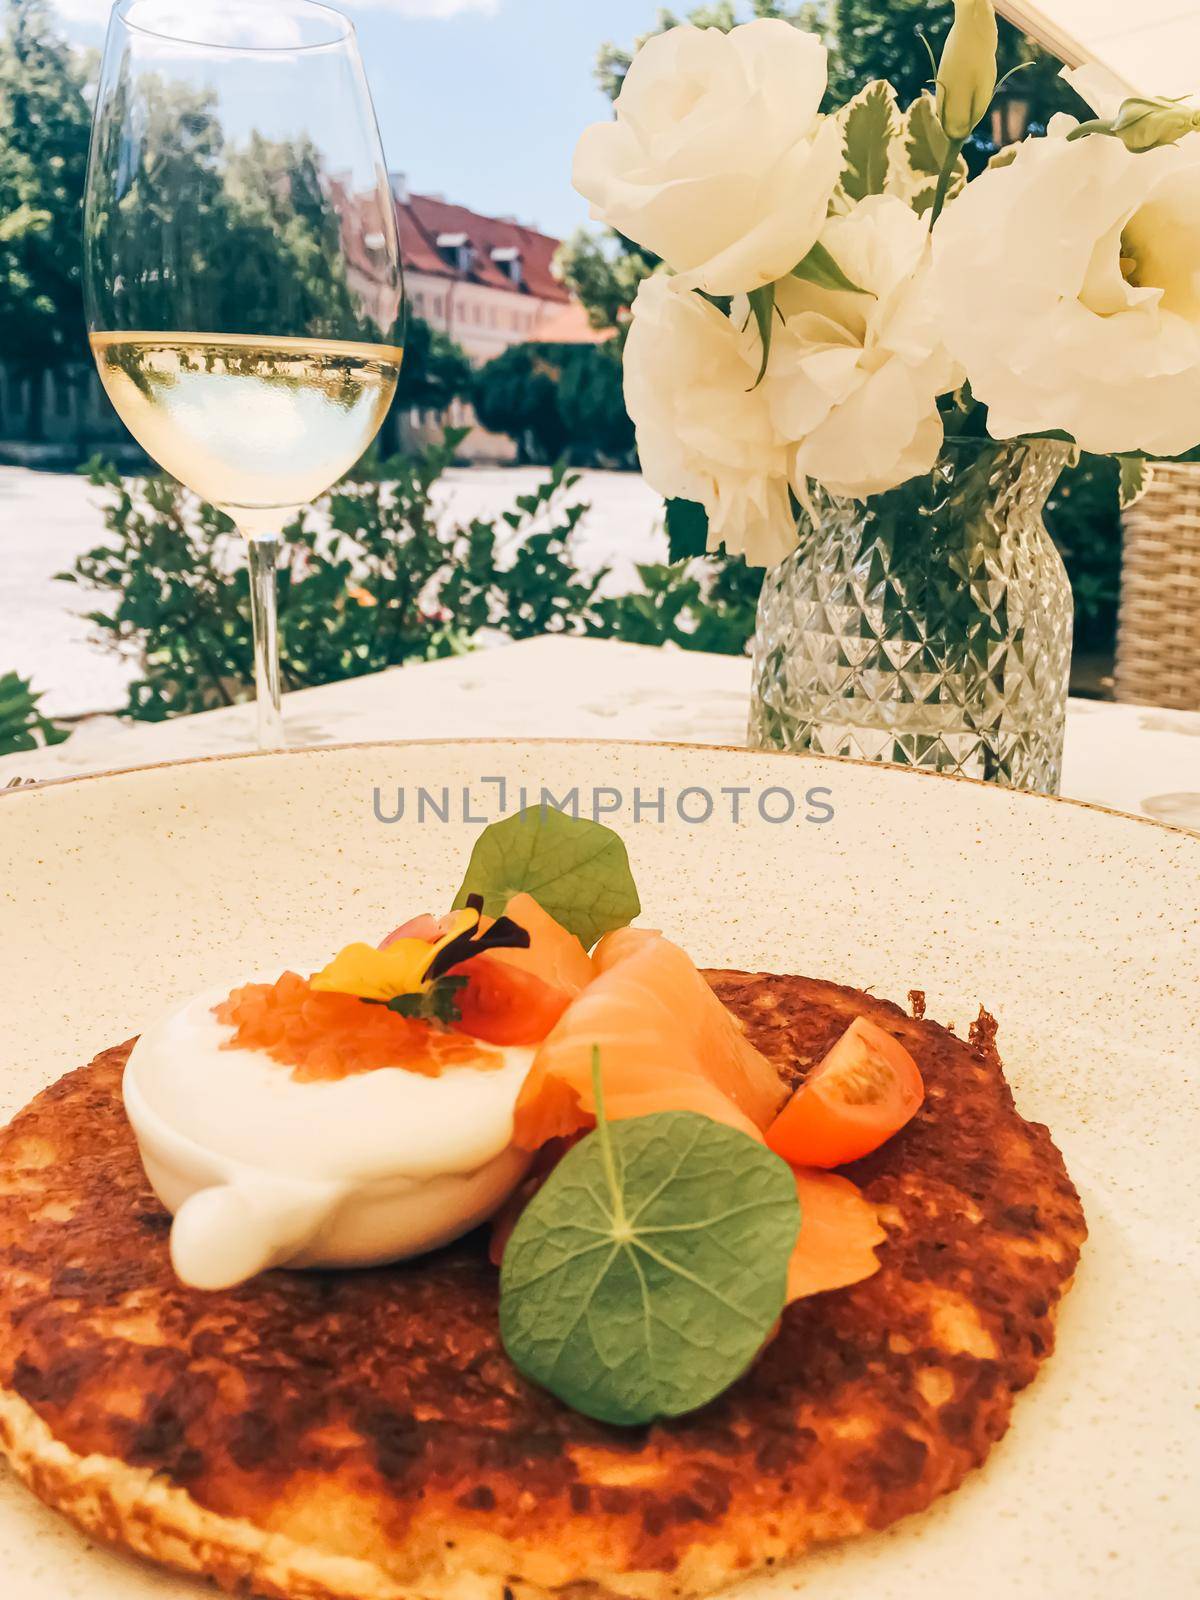 Potato fritter pancake with red caviar, salmon and sour cream in luxury restaurant outdoors in summer.